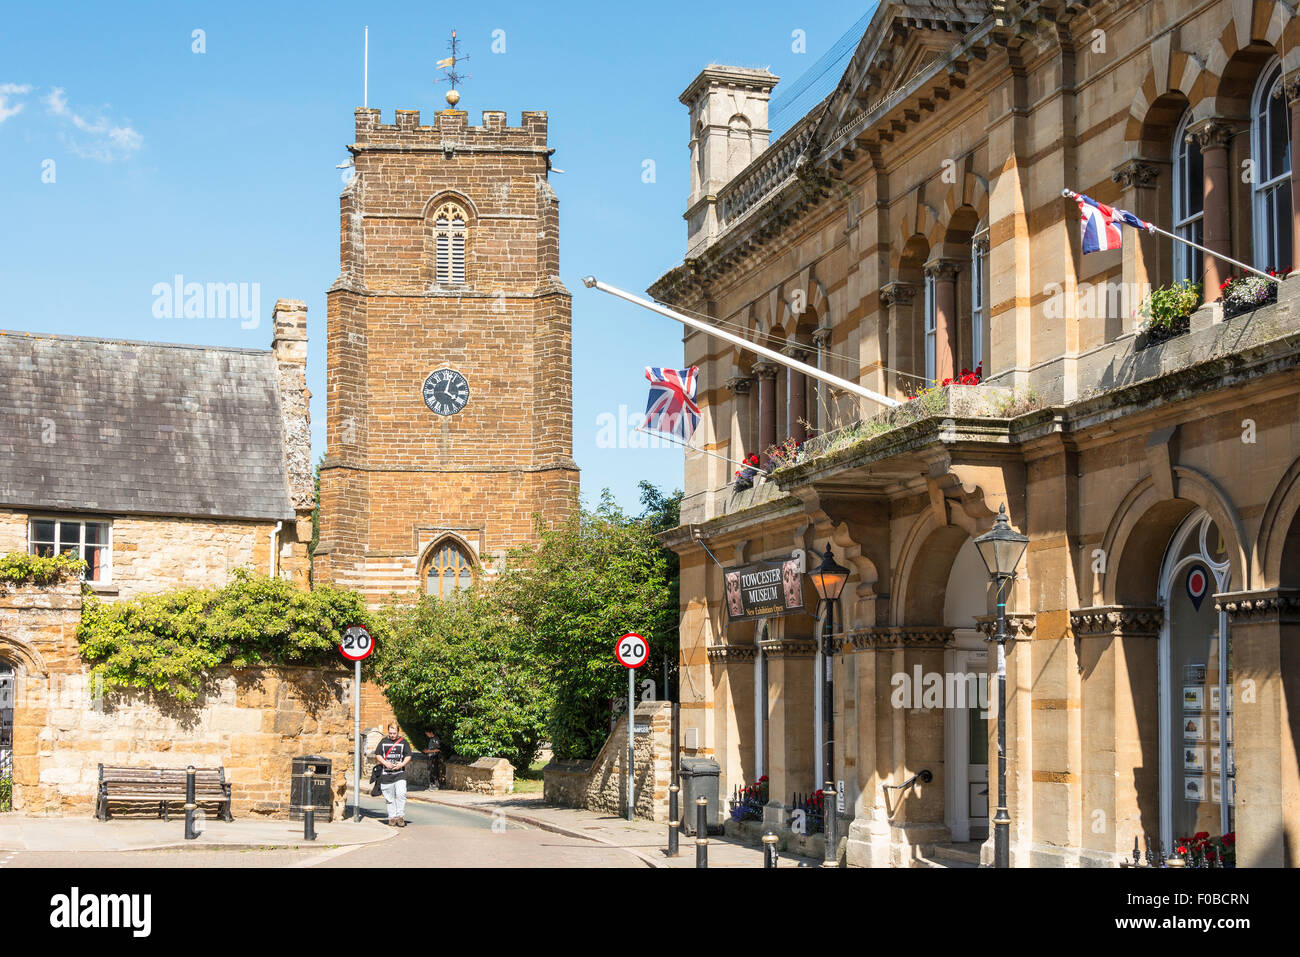 The Old Town Hall and St Lawrence Church, Market Square, Towcester, Northamptonshire, England, United Kingdom Stock Photo